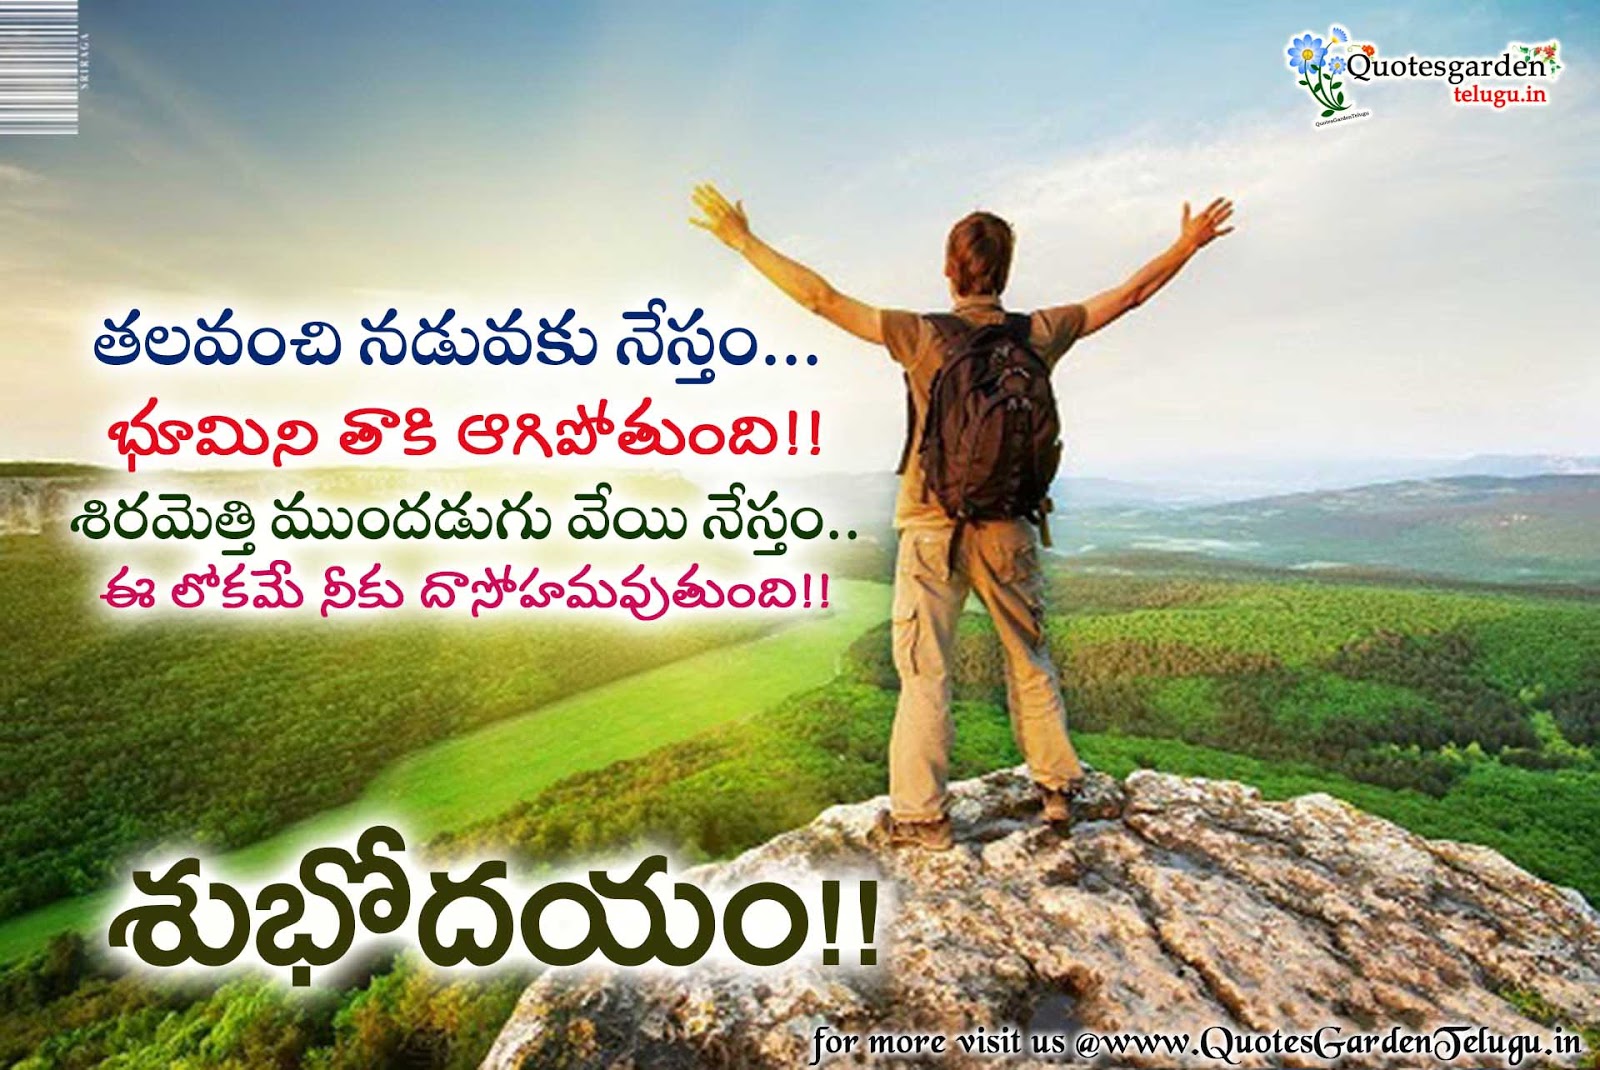 Good Morning Quotes Telugu Images Hd Wallpapers Quotes Garden